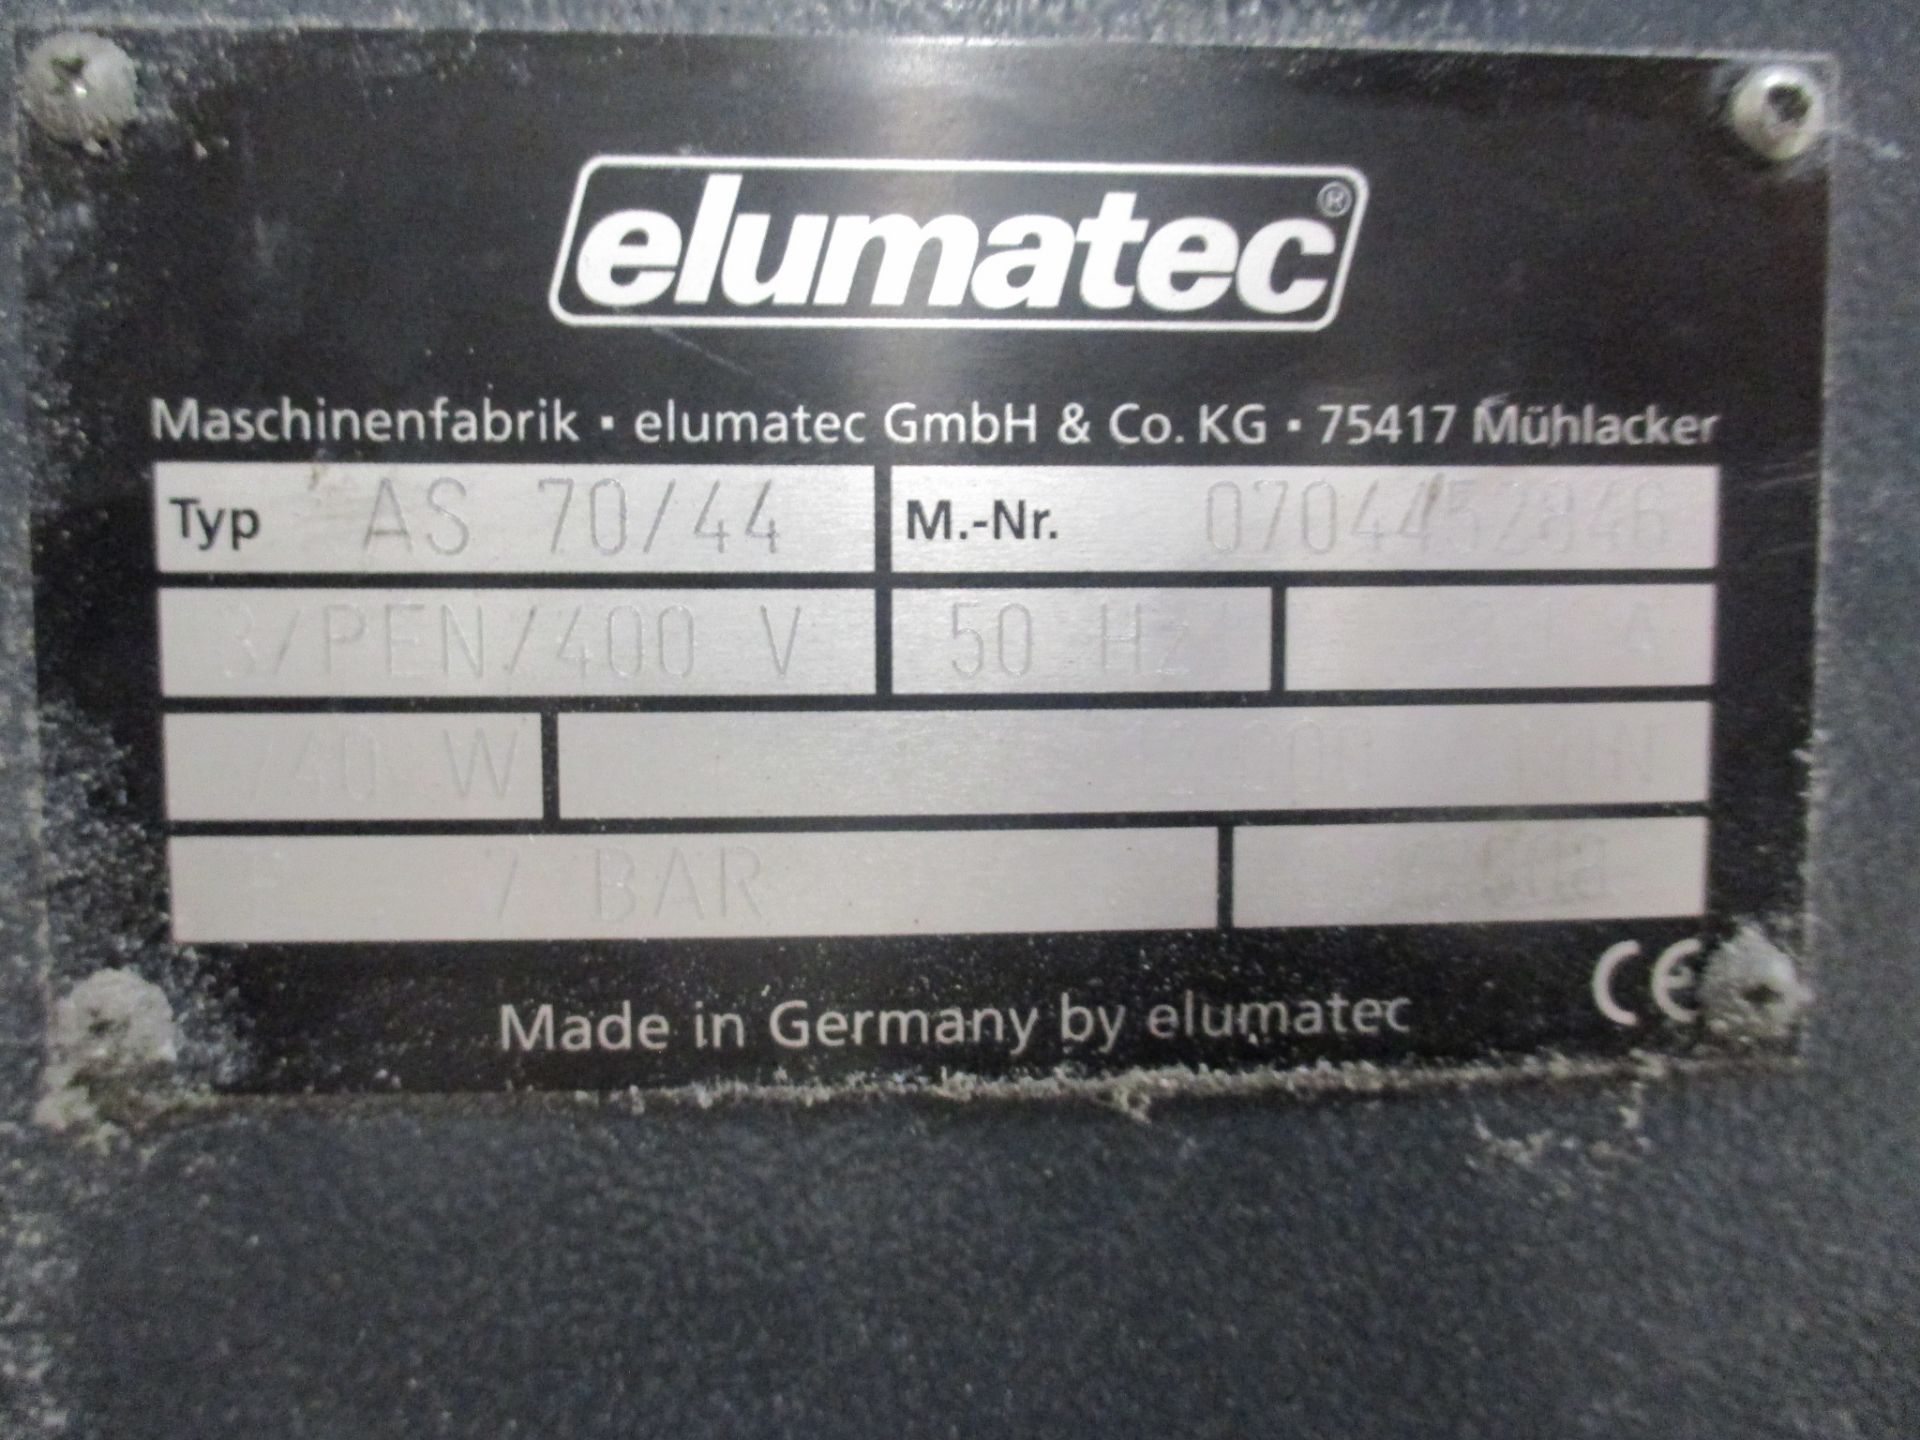 1: Elumatec AS70/44 Single Head Copy Router Serial Number: 0704452846 Year of Manufacture: 2008 - Image 2 of 2